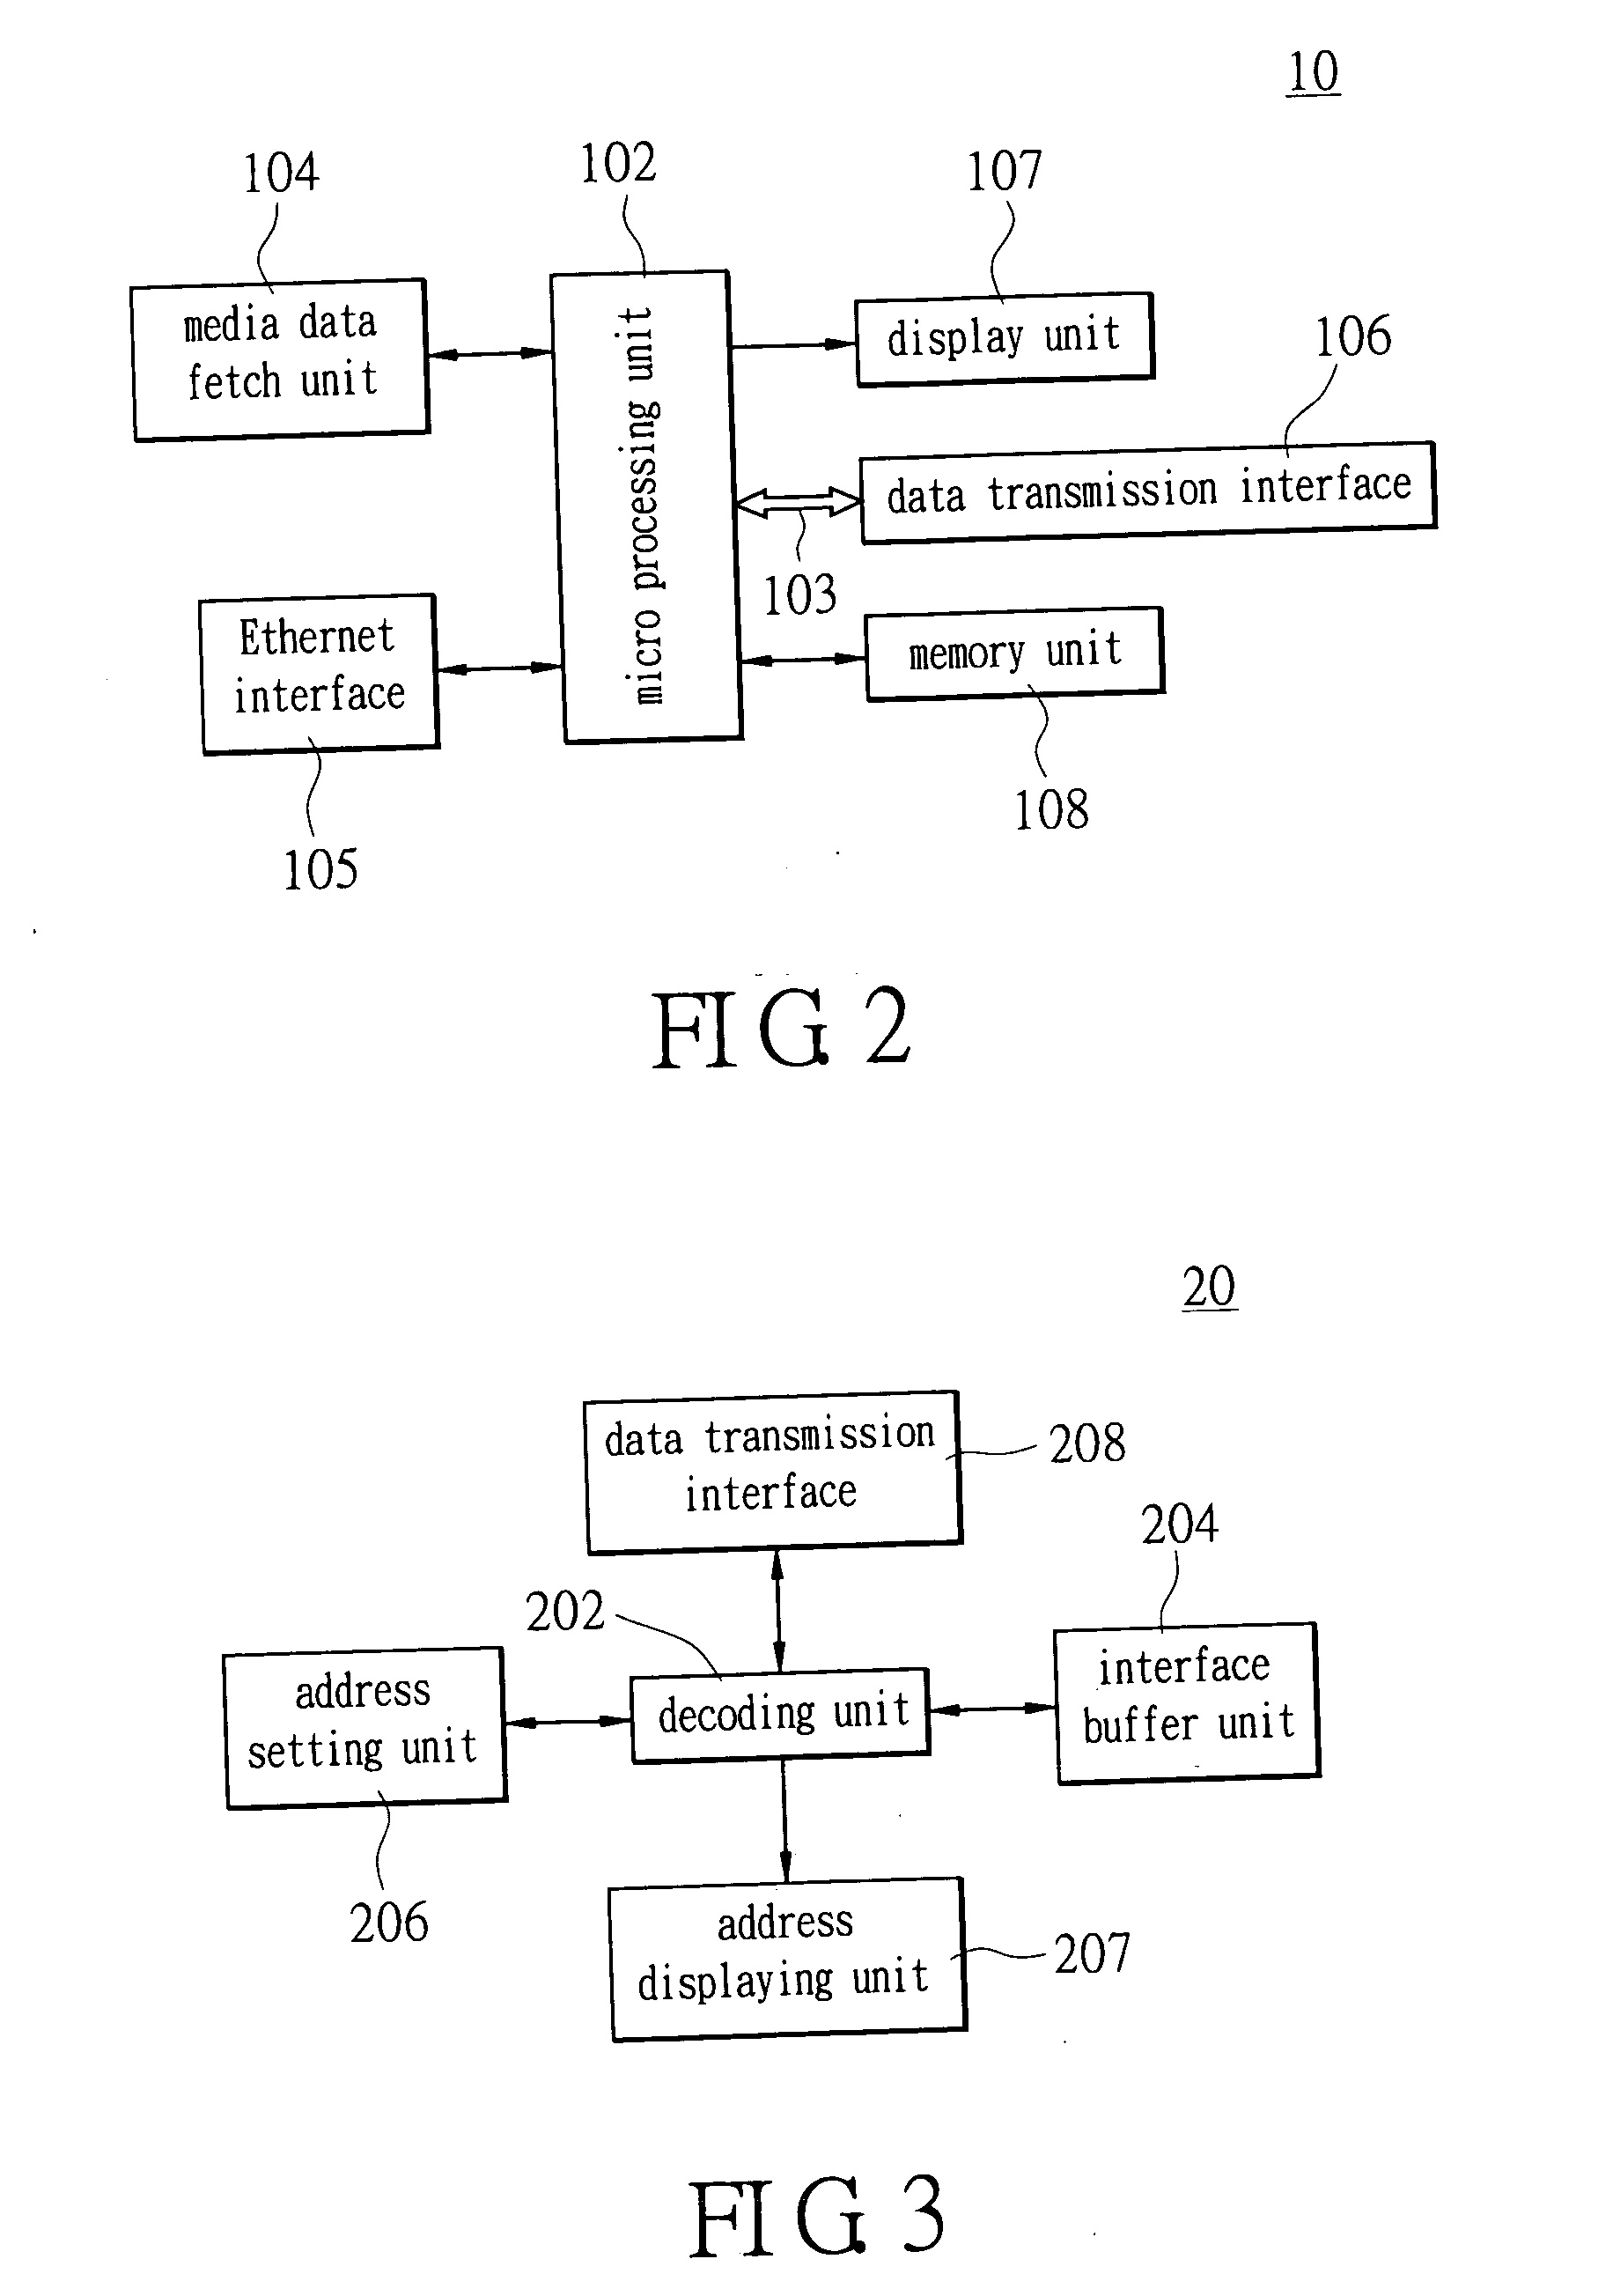 Light emitting device single-cluster lamp control system